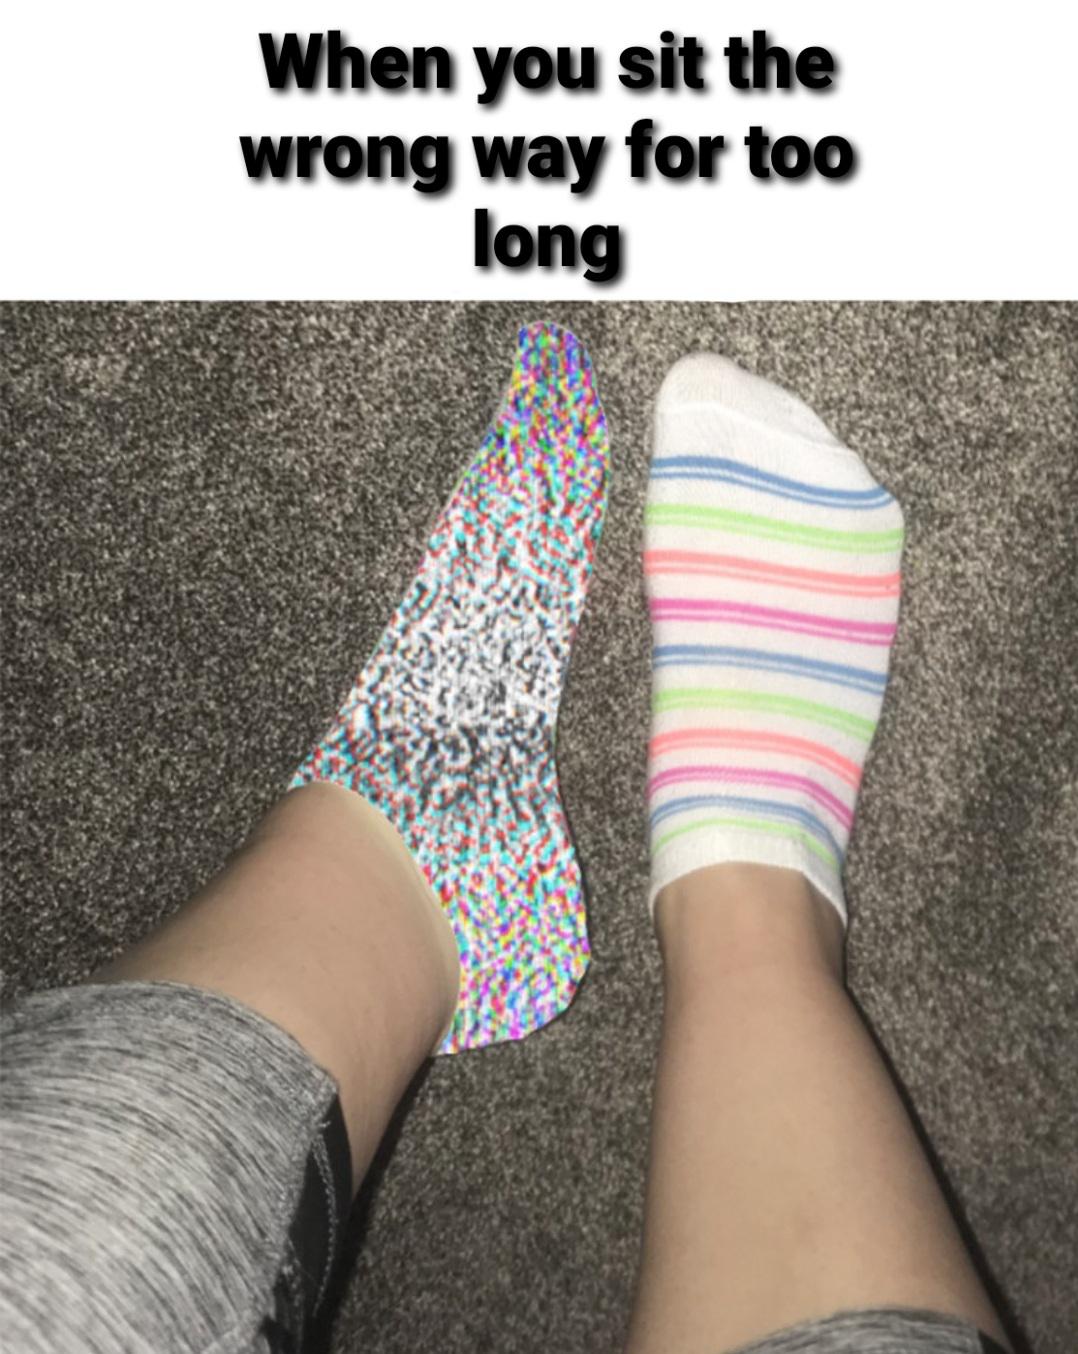 funny memes - dank memes - sock - When you sit the wrong way for too long